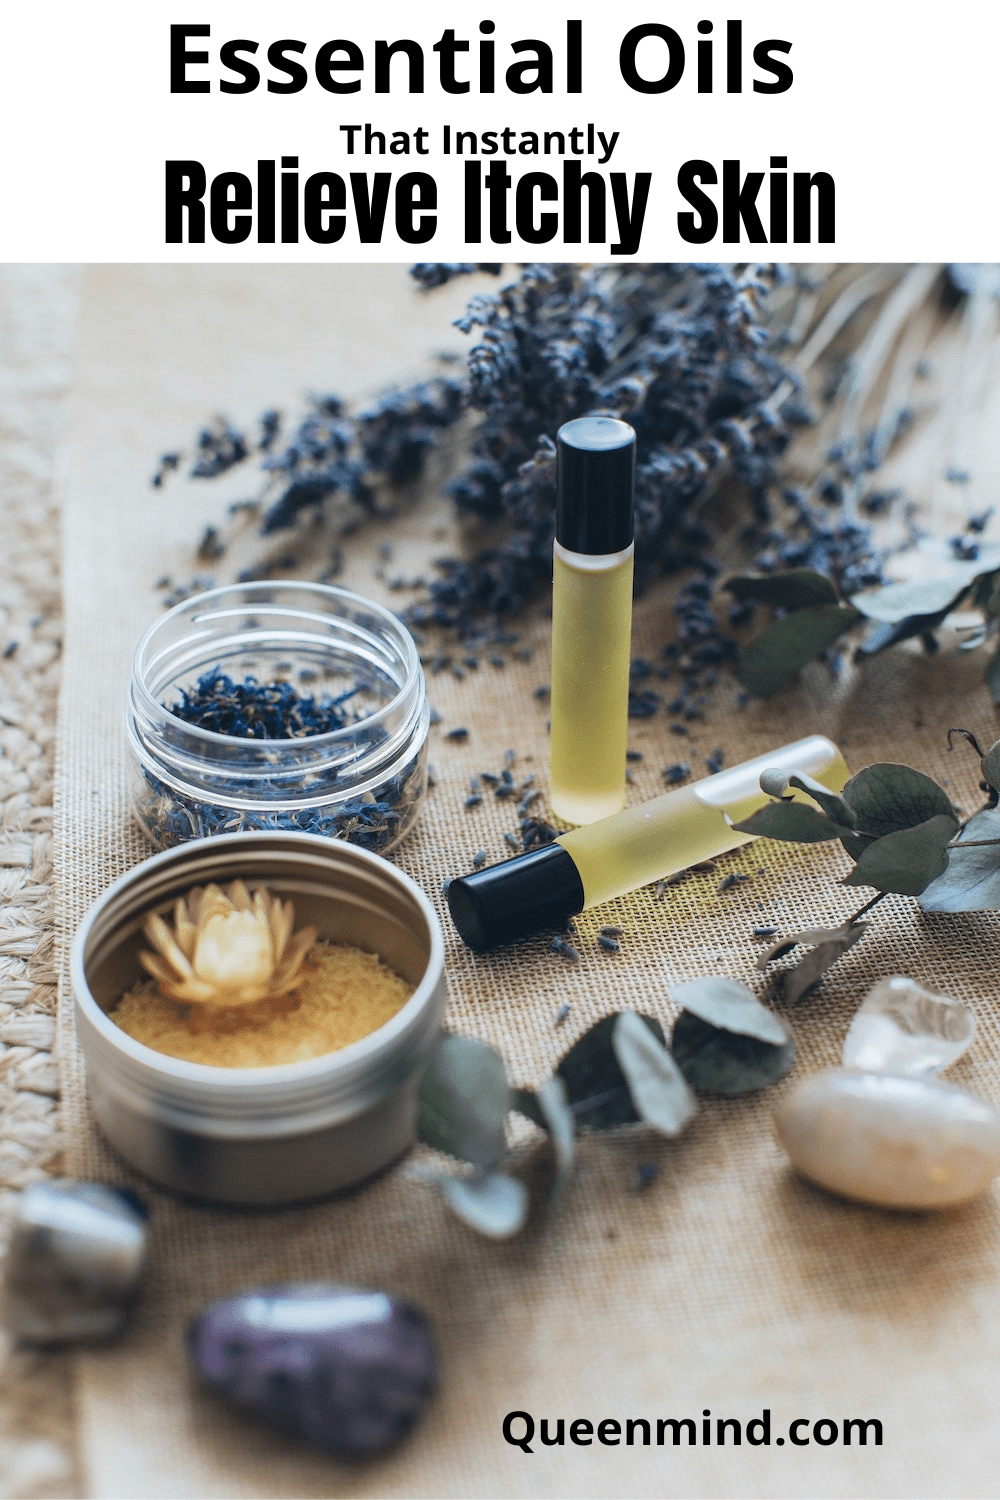 Essential Oils That Instantly Relieve Itchy Skin